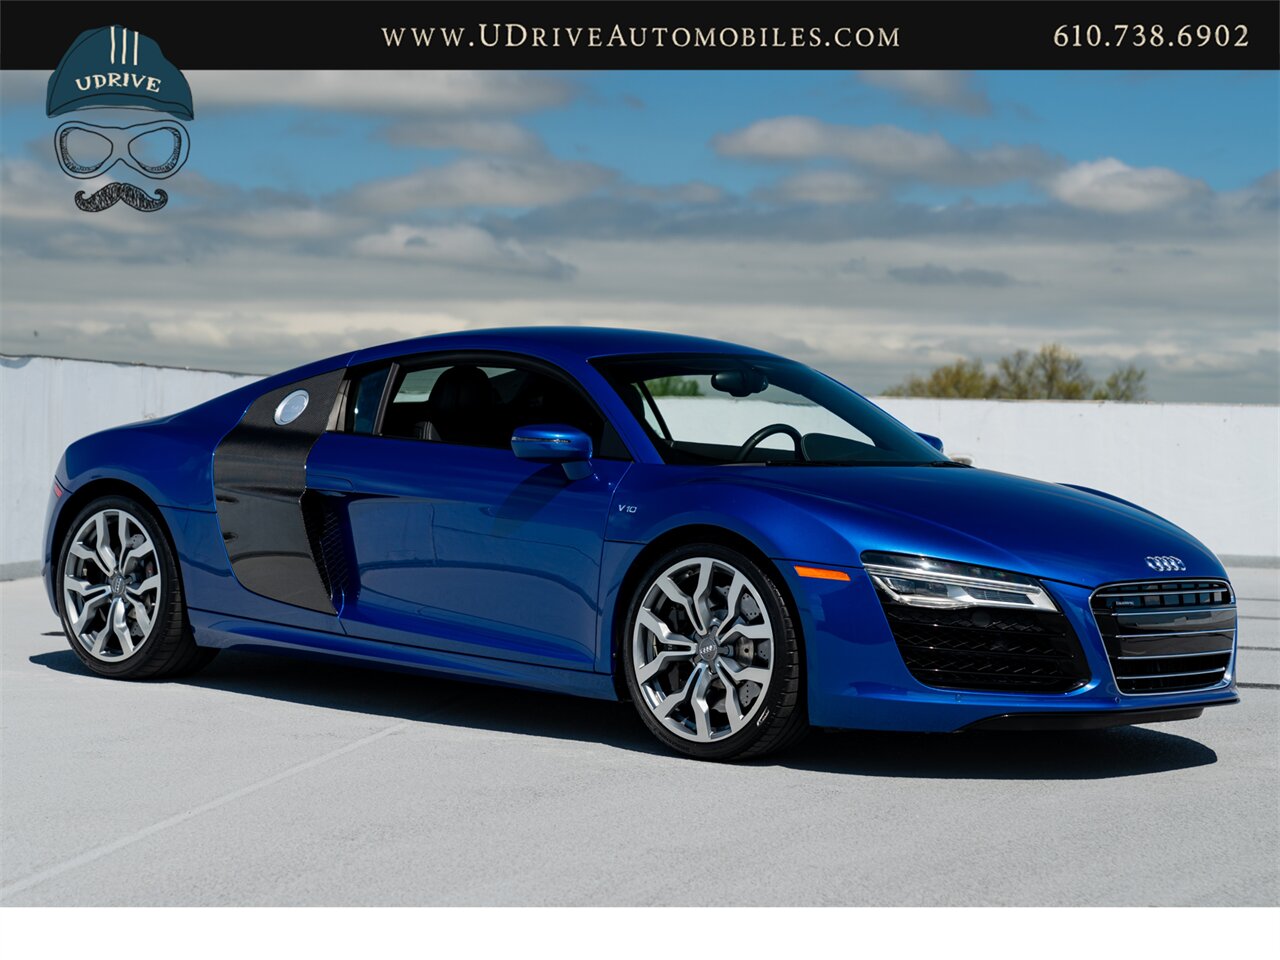 2015 Audi R8 5.2 V10 Quattro 6 Speed Manual 10k Miles  Diamond Stitched Leather 1 of 2 - Photo 14 - West Chester, PA 19382